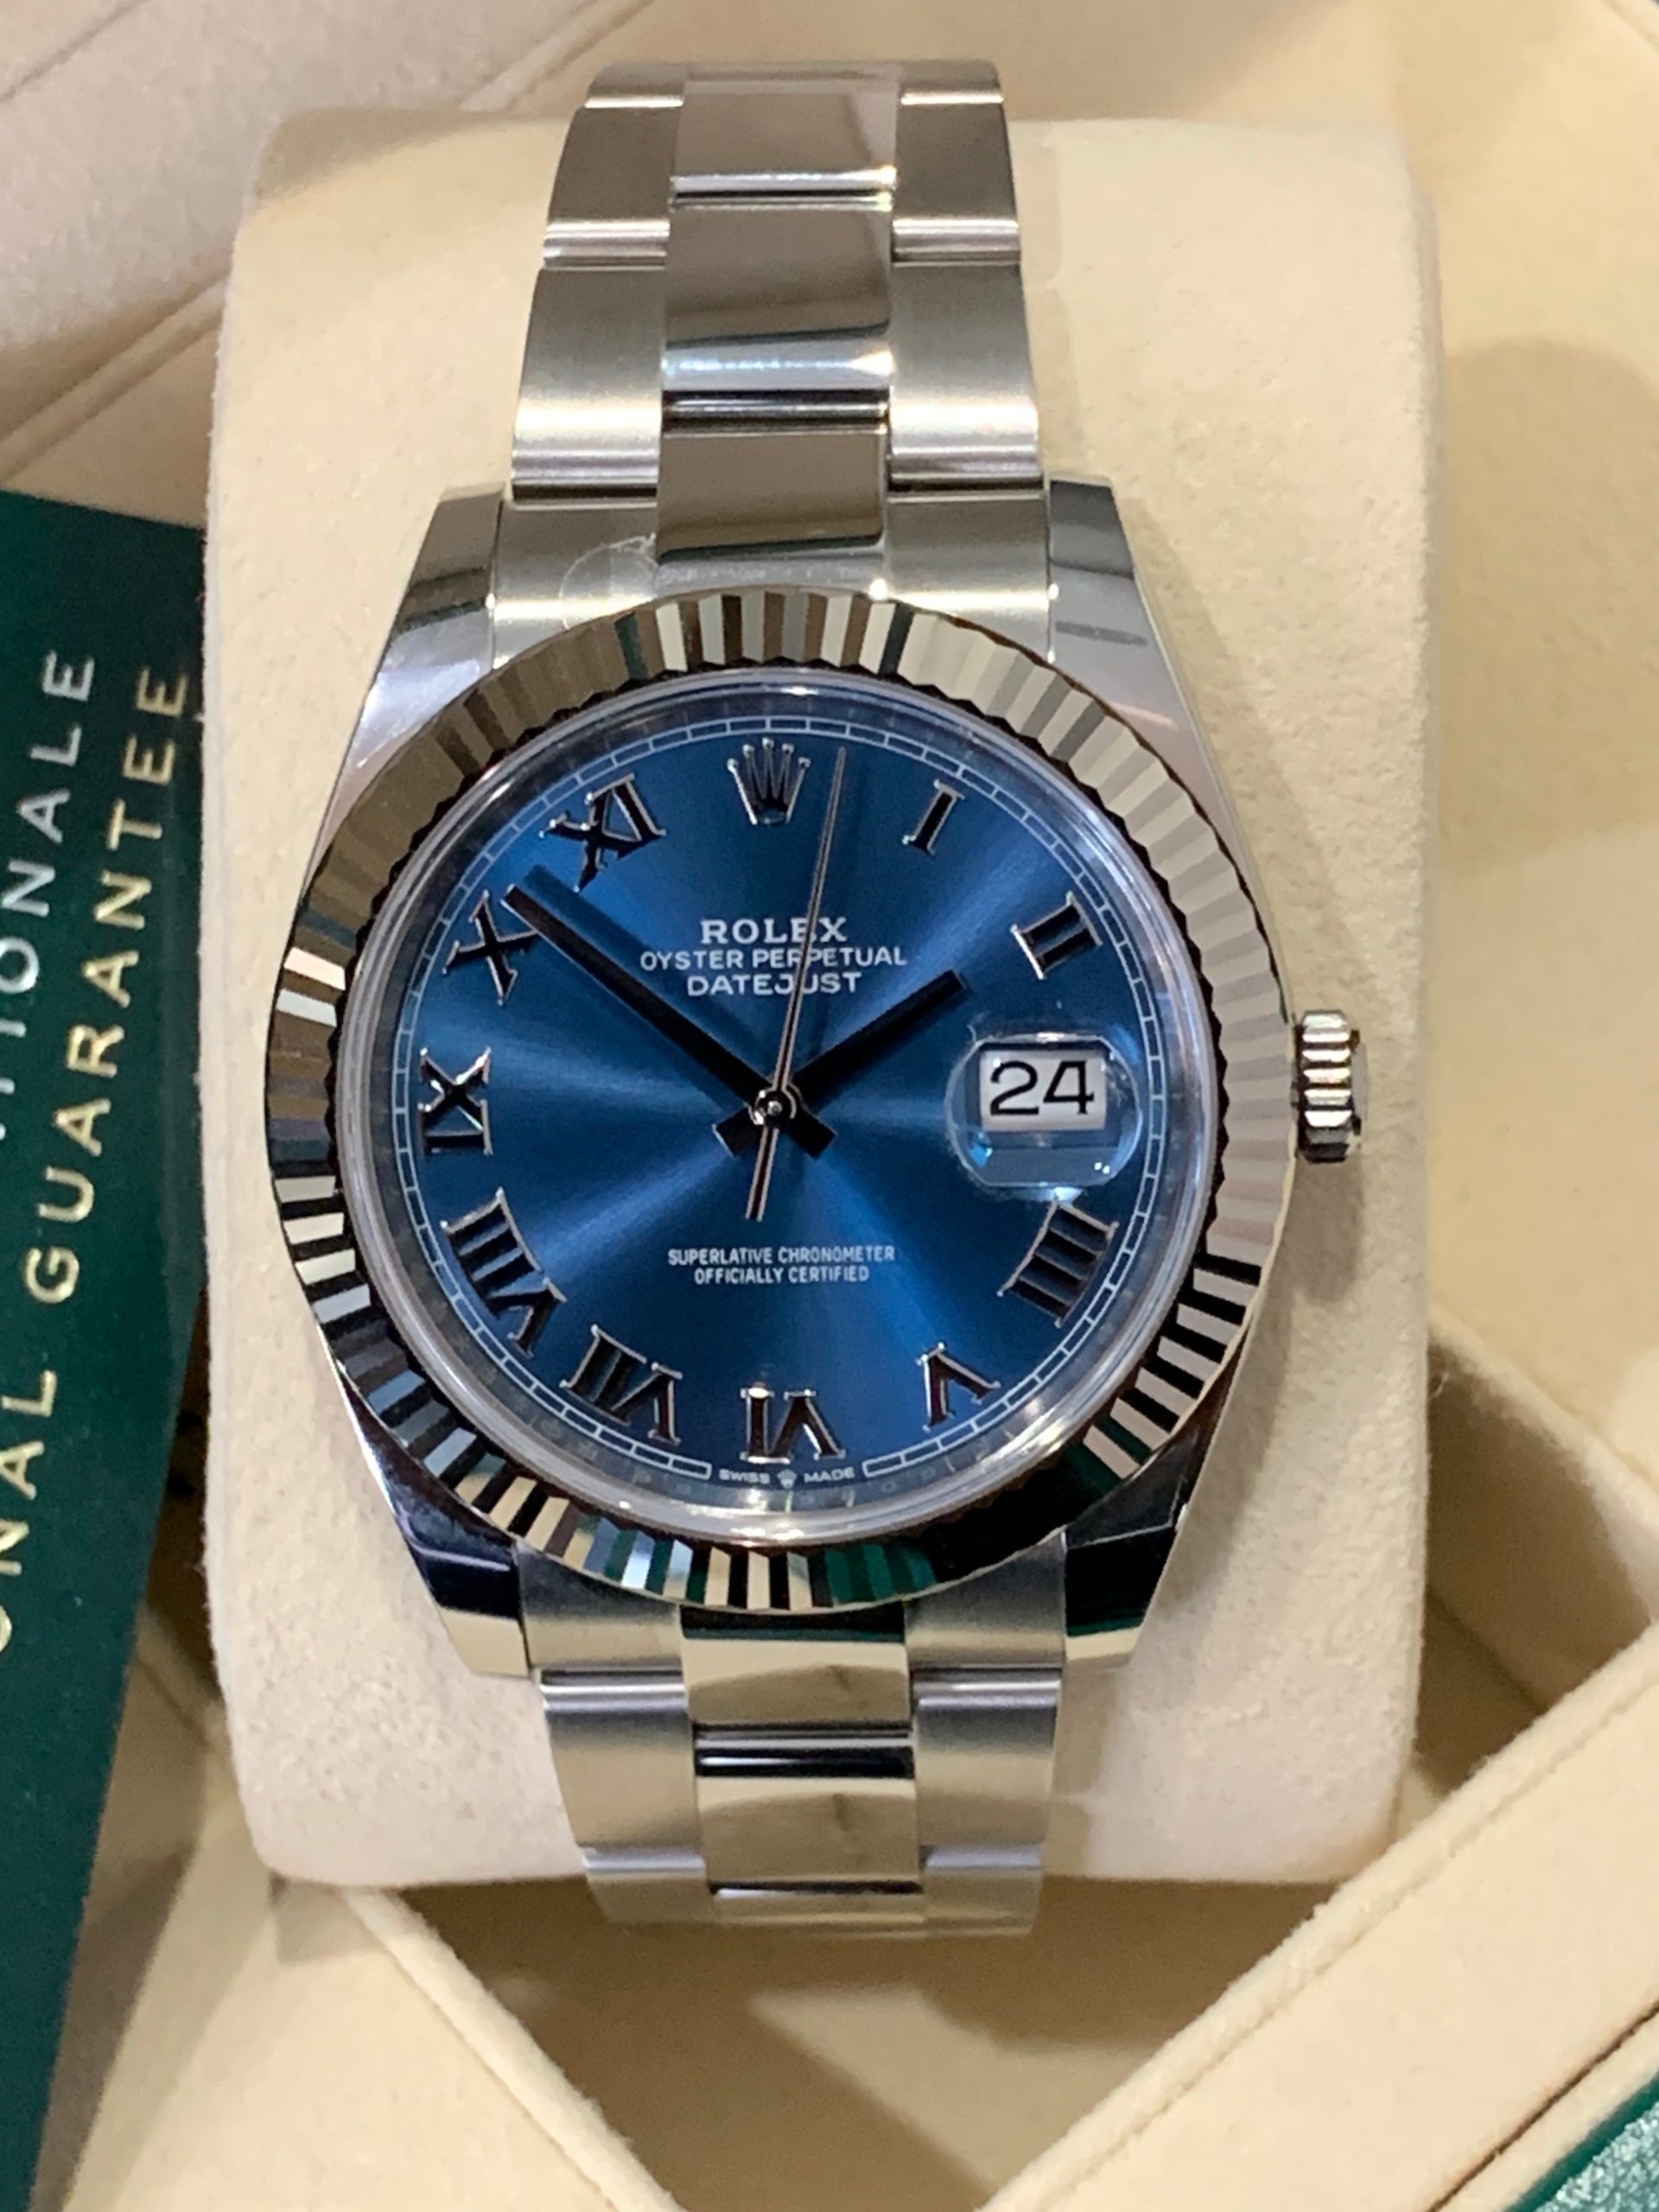 ROLEX 41MM DATEJUST BLUE DIAL Carr Watches